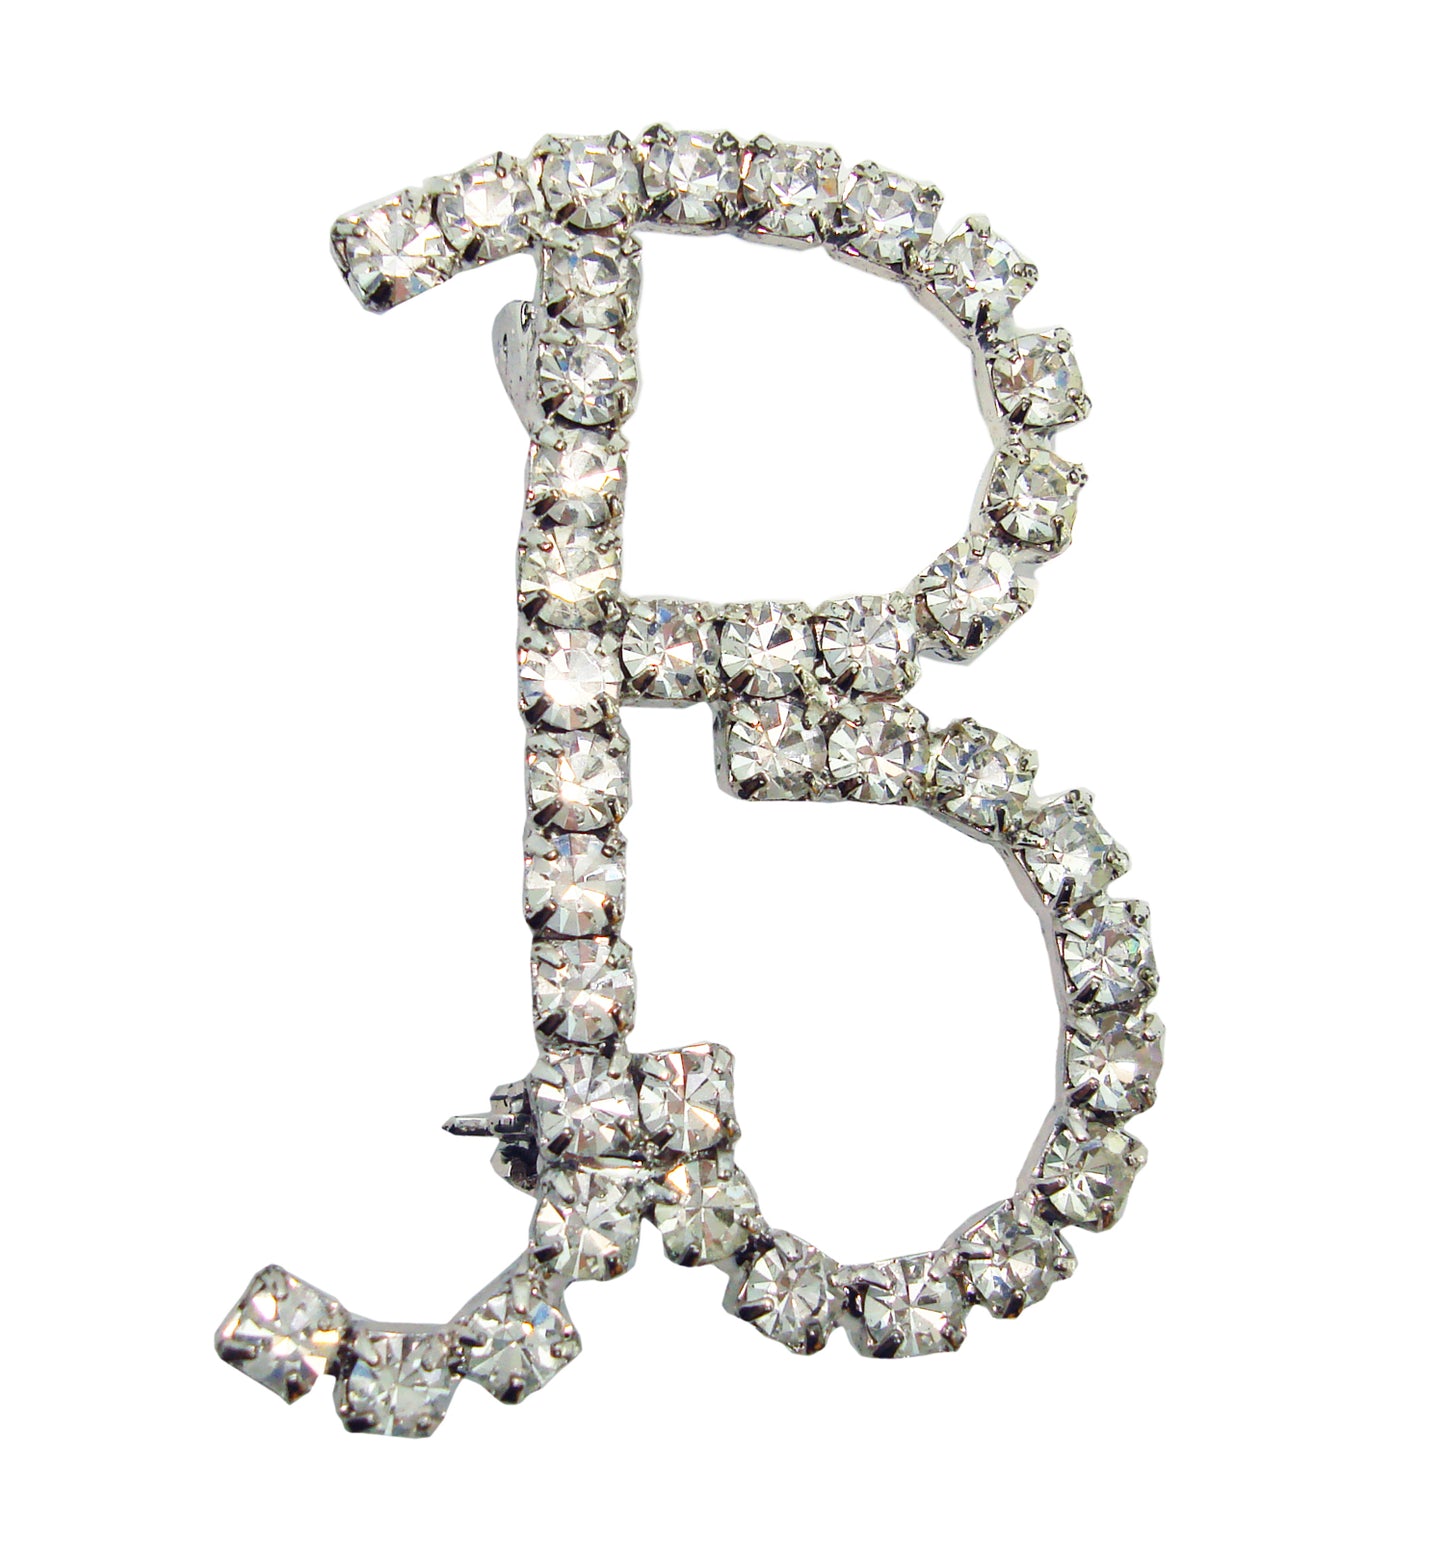 Alphabet Letter Initial "B" Pin Brooch Pave Rhinestones Silver Tone 1 1/2"